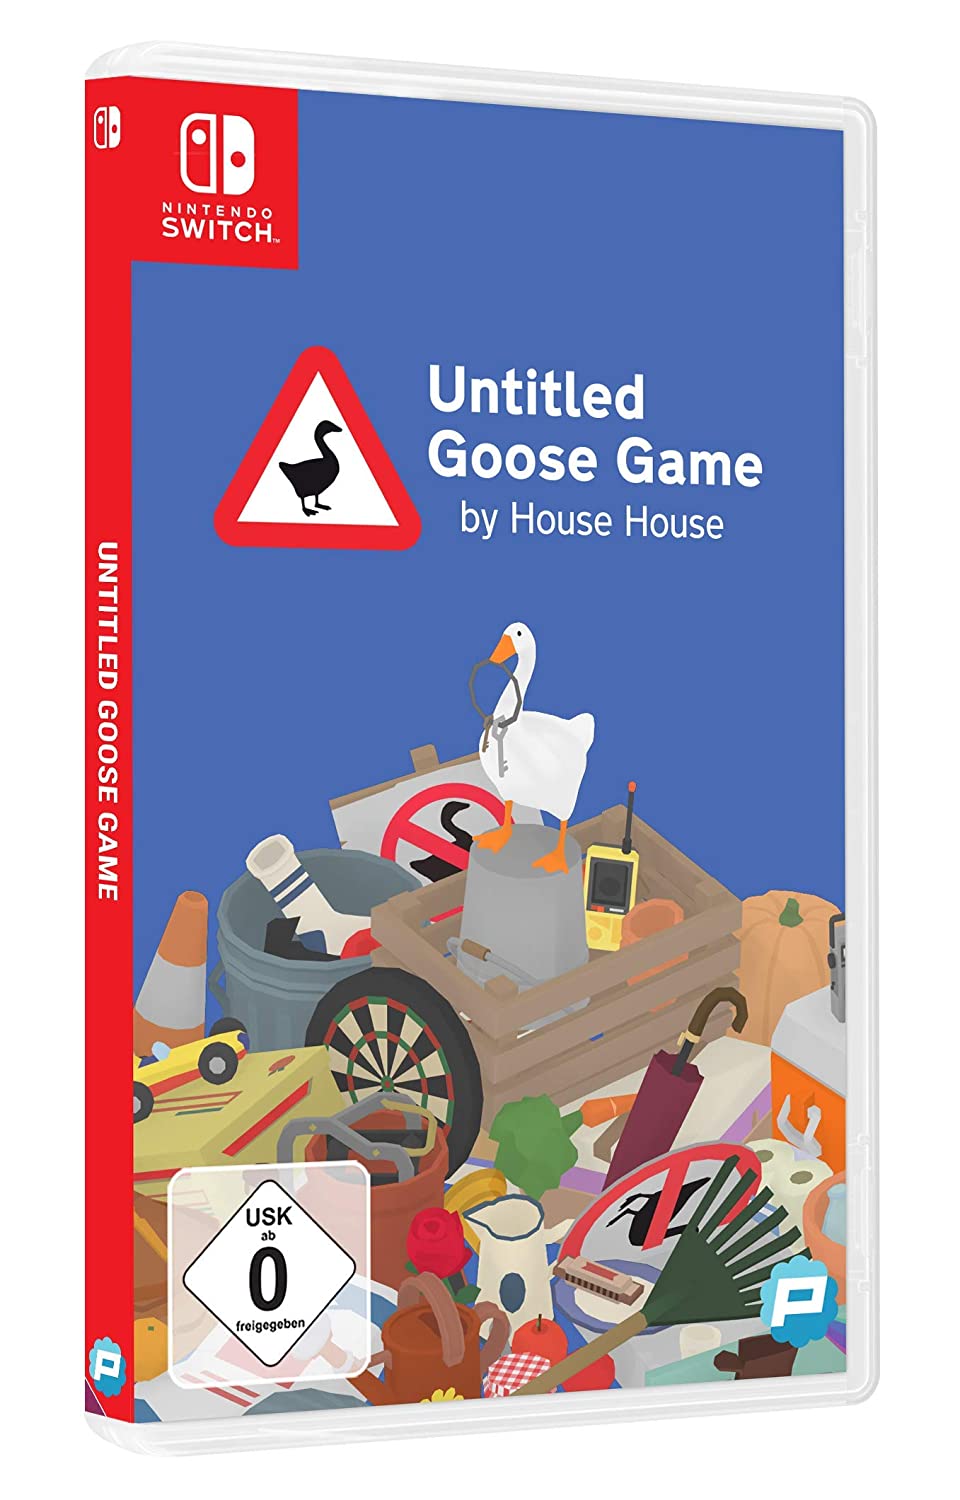 Two-Player Co-Op Comes To Untitled Goose Game Next Month - Game